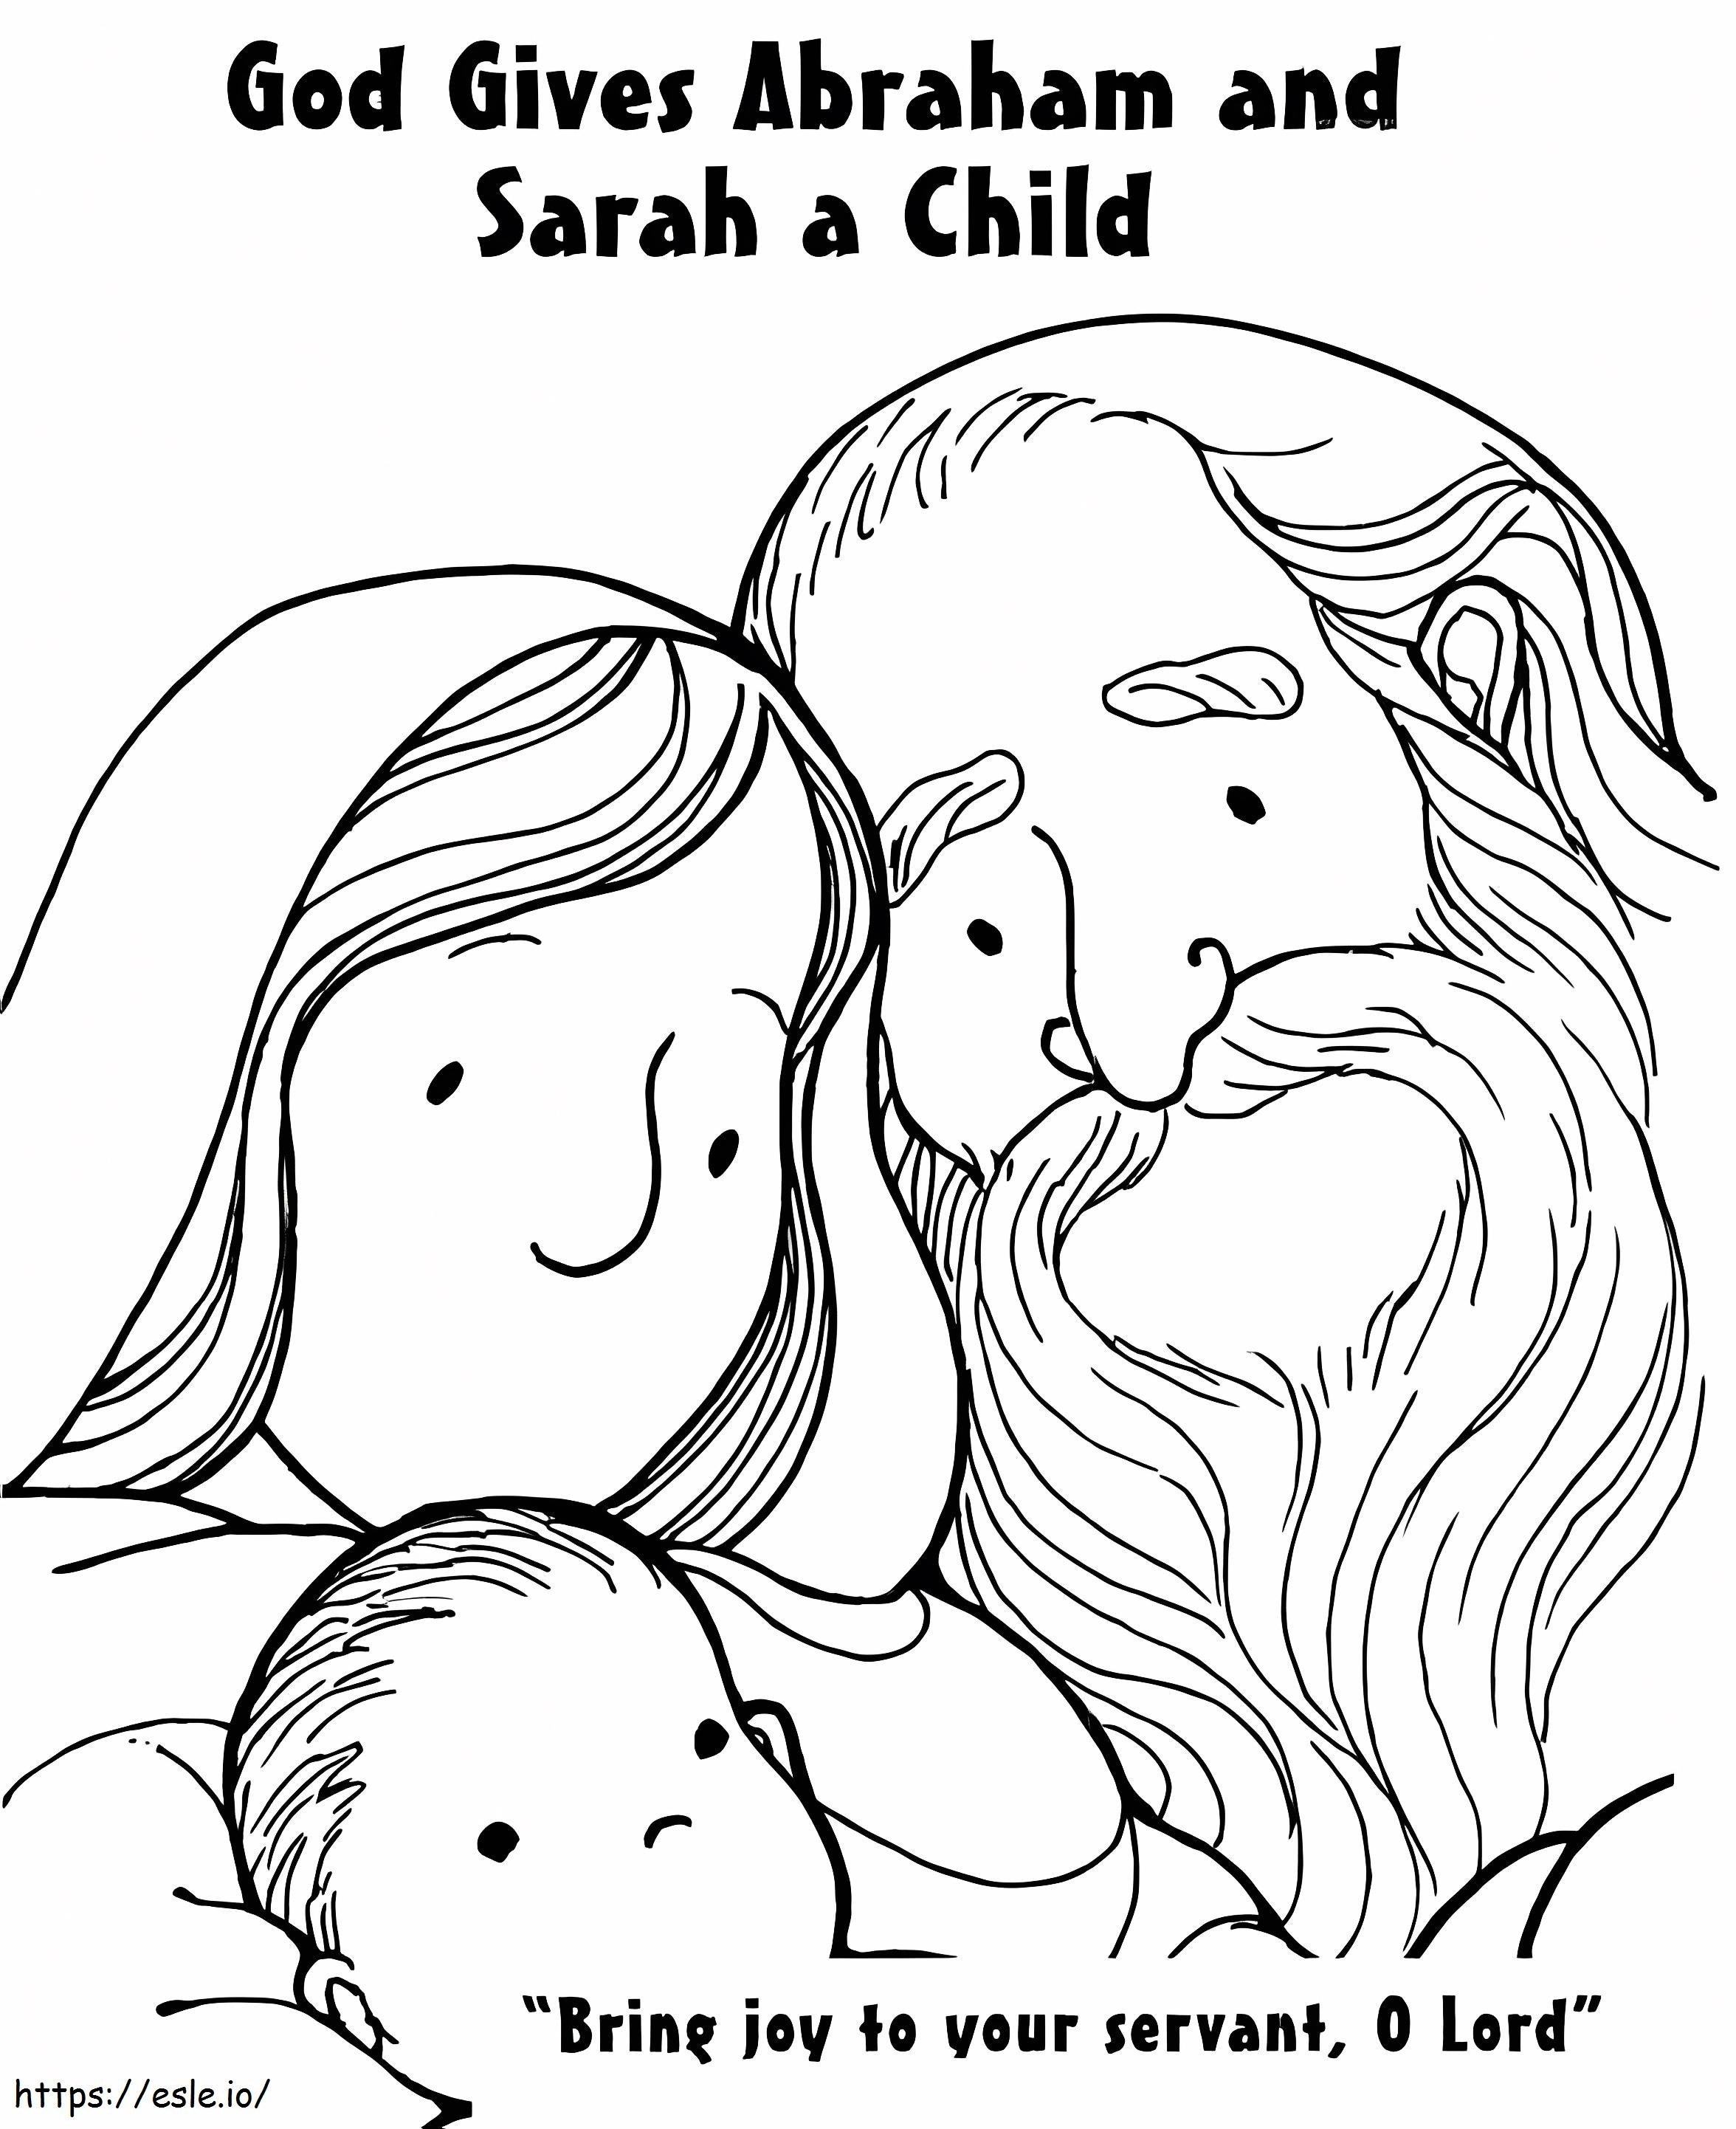 God Gives Abraham And Sarah A Child coloring page